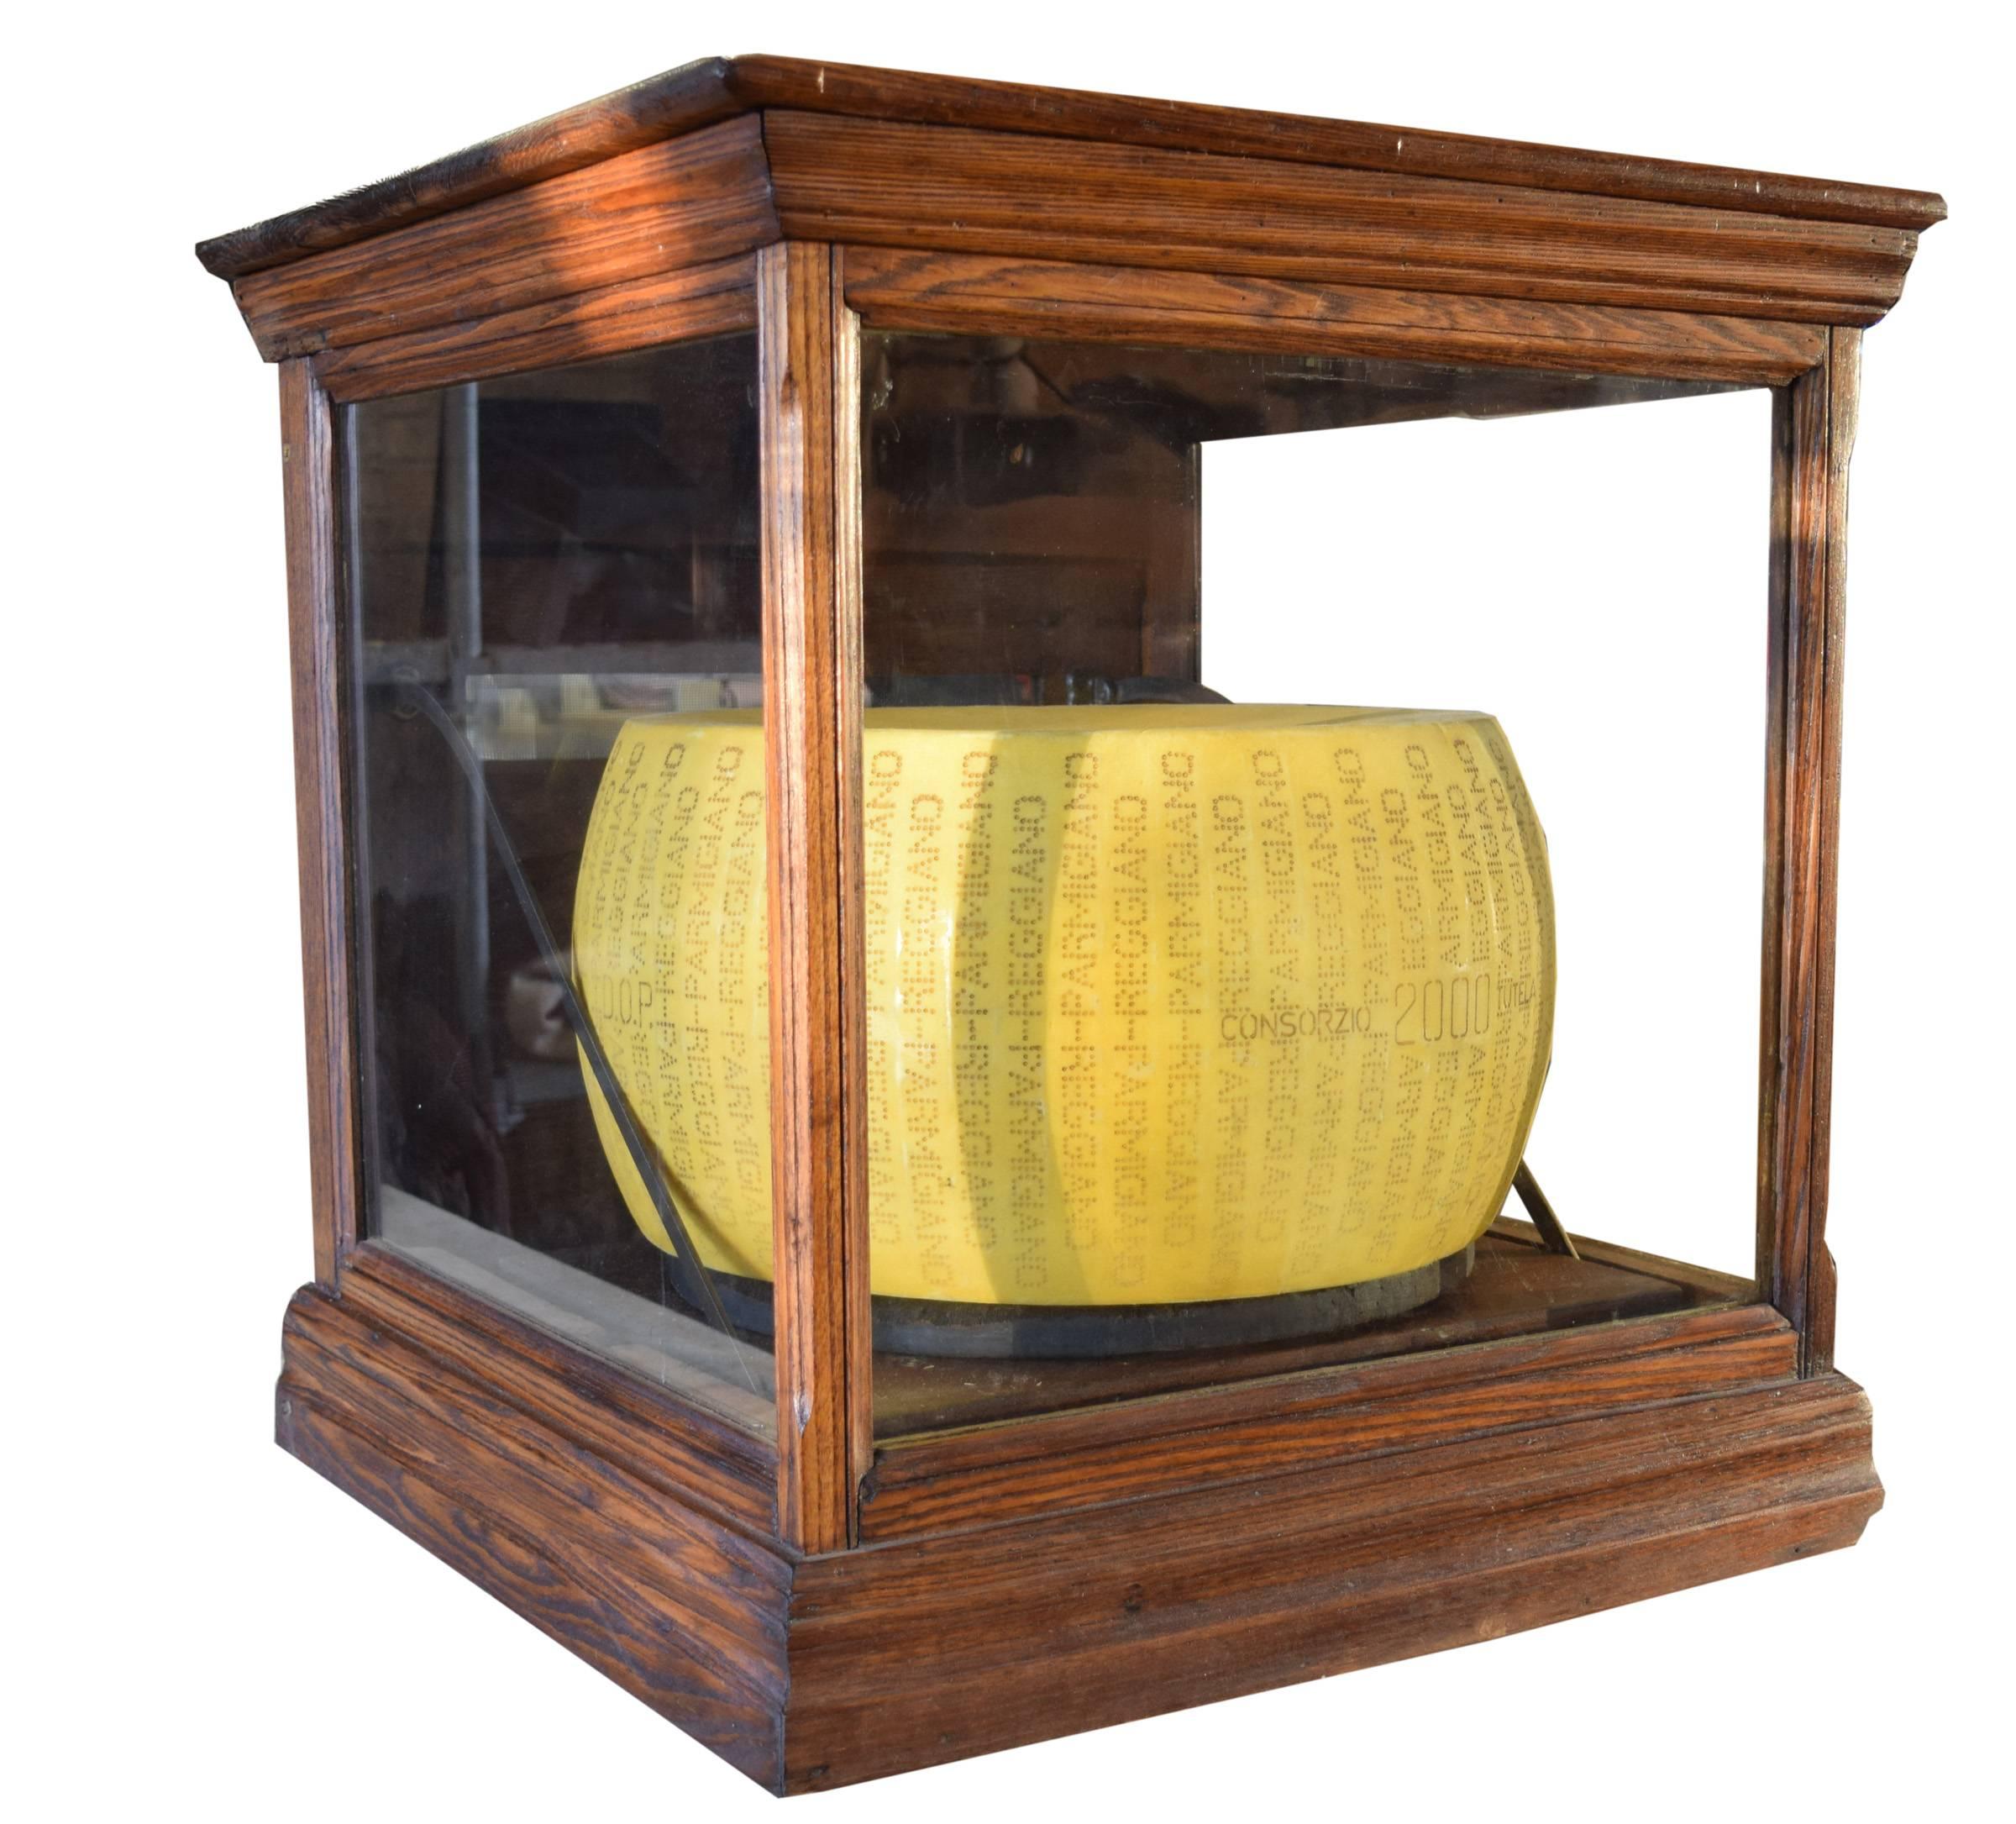 An early 20th century American oak cheesemonger's display case with sliding platform mechanism. Three sides are glass and the fourth is wood with a screened vent. When the back door is opened, the cheese simultaneously slides out from the case.